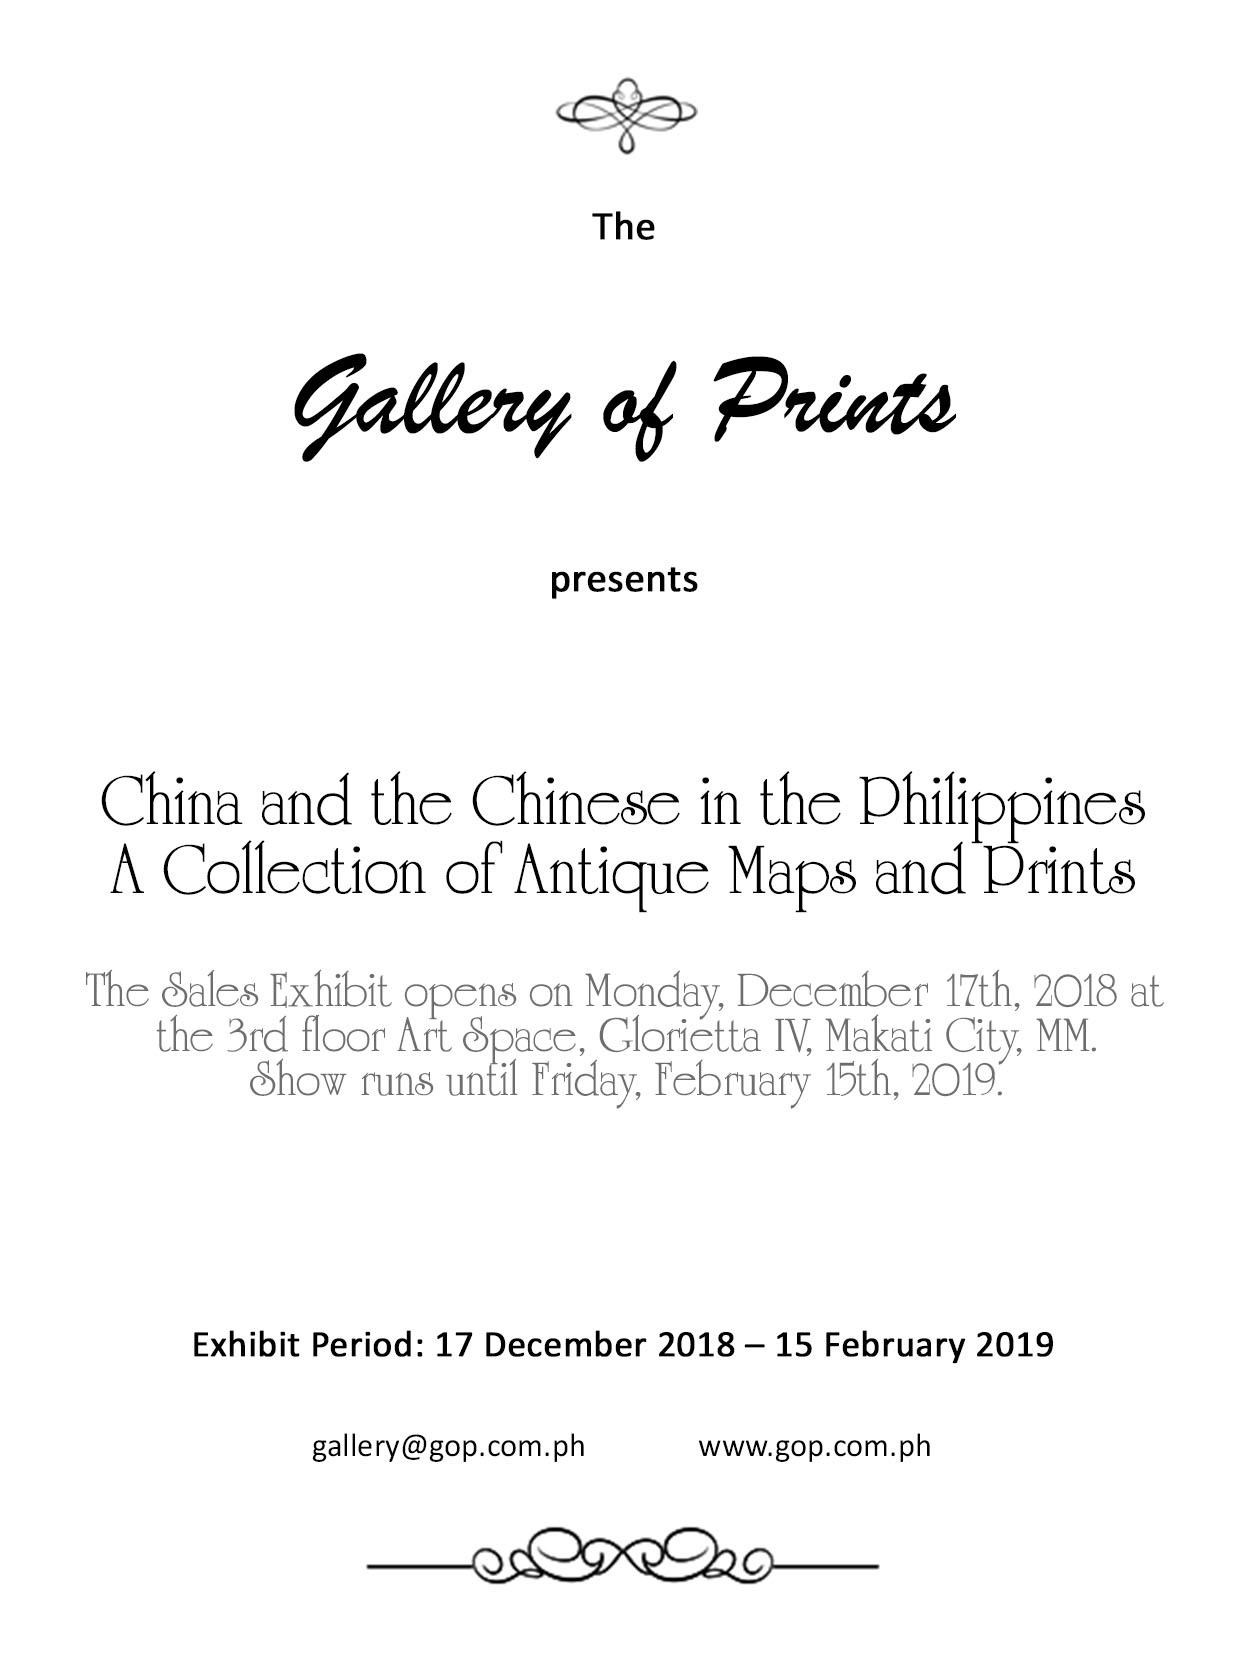 China and the Chinese in the Philippines - China and the Chinese in the Philippines